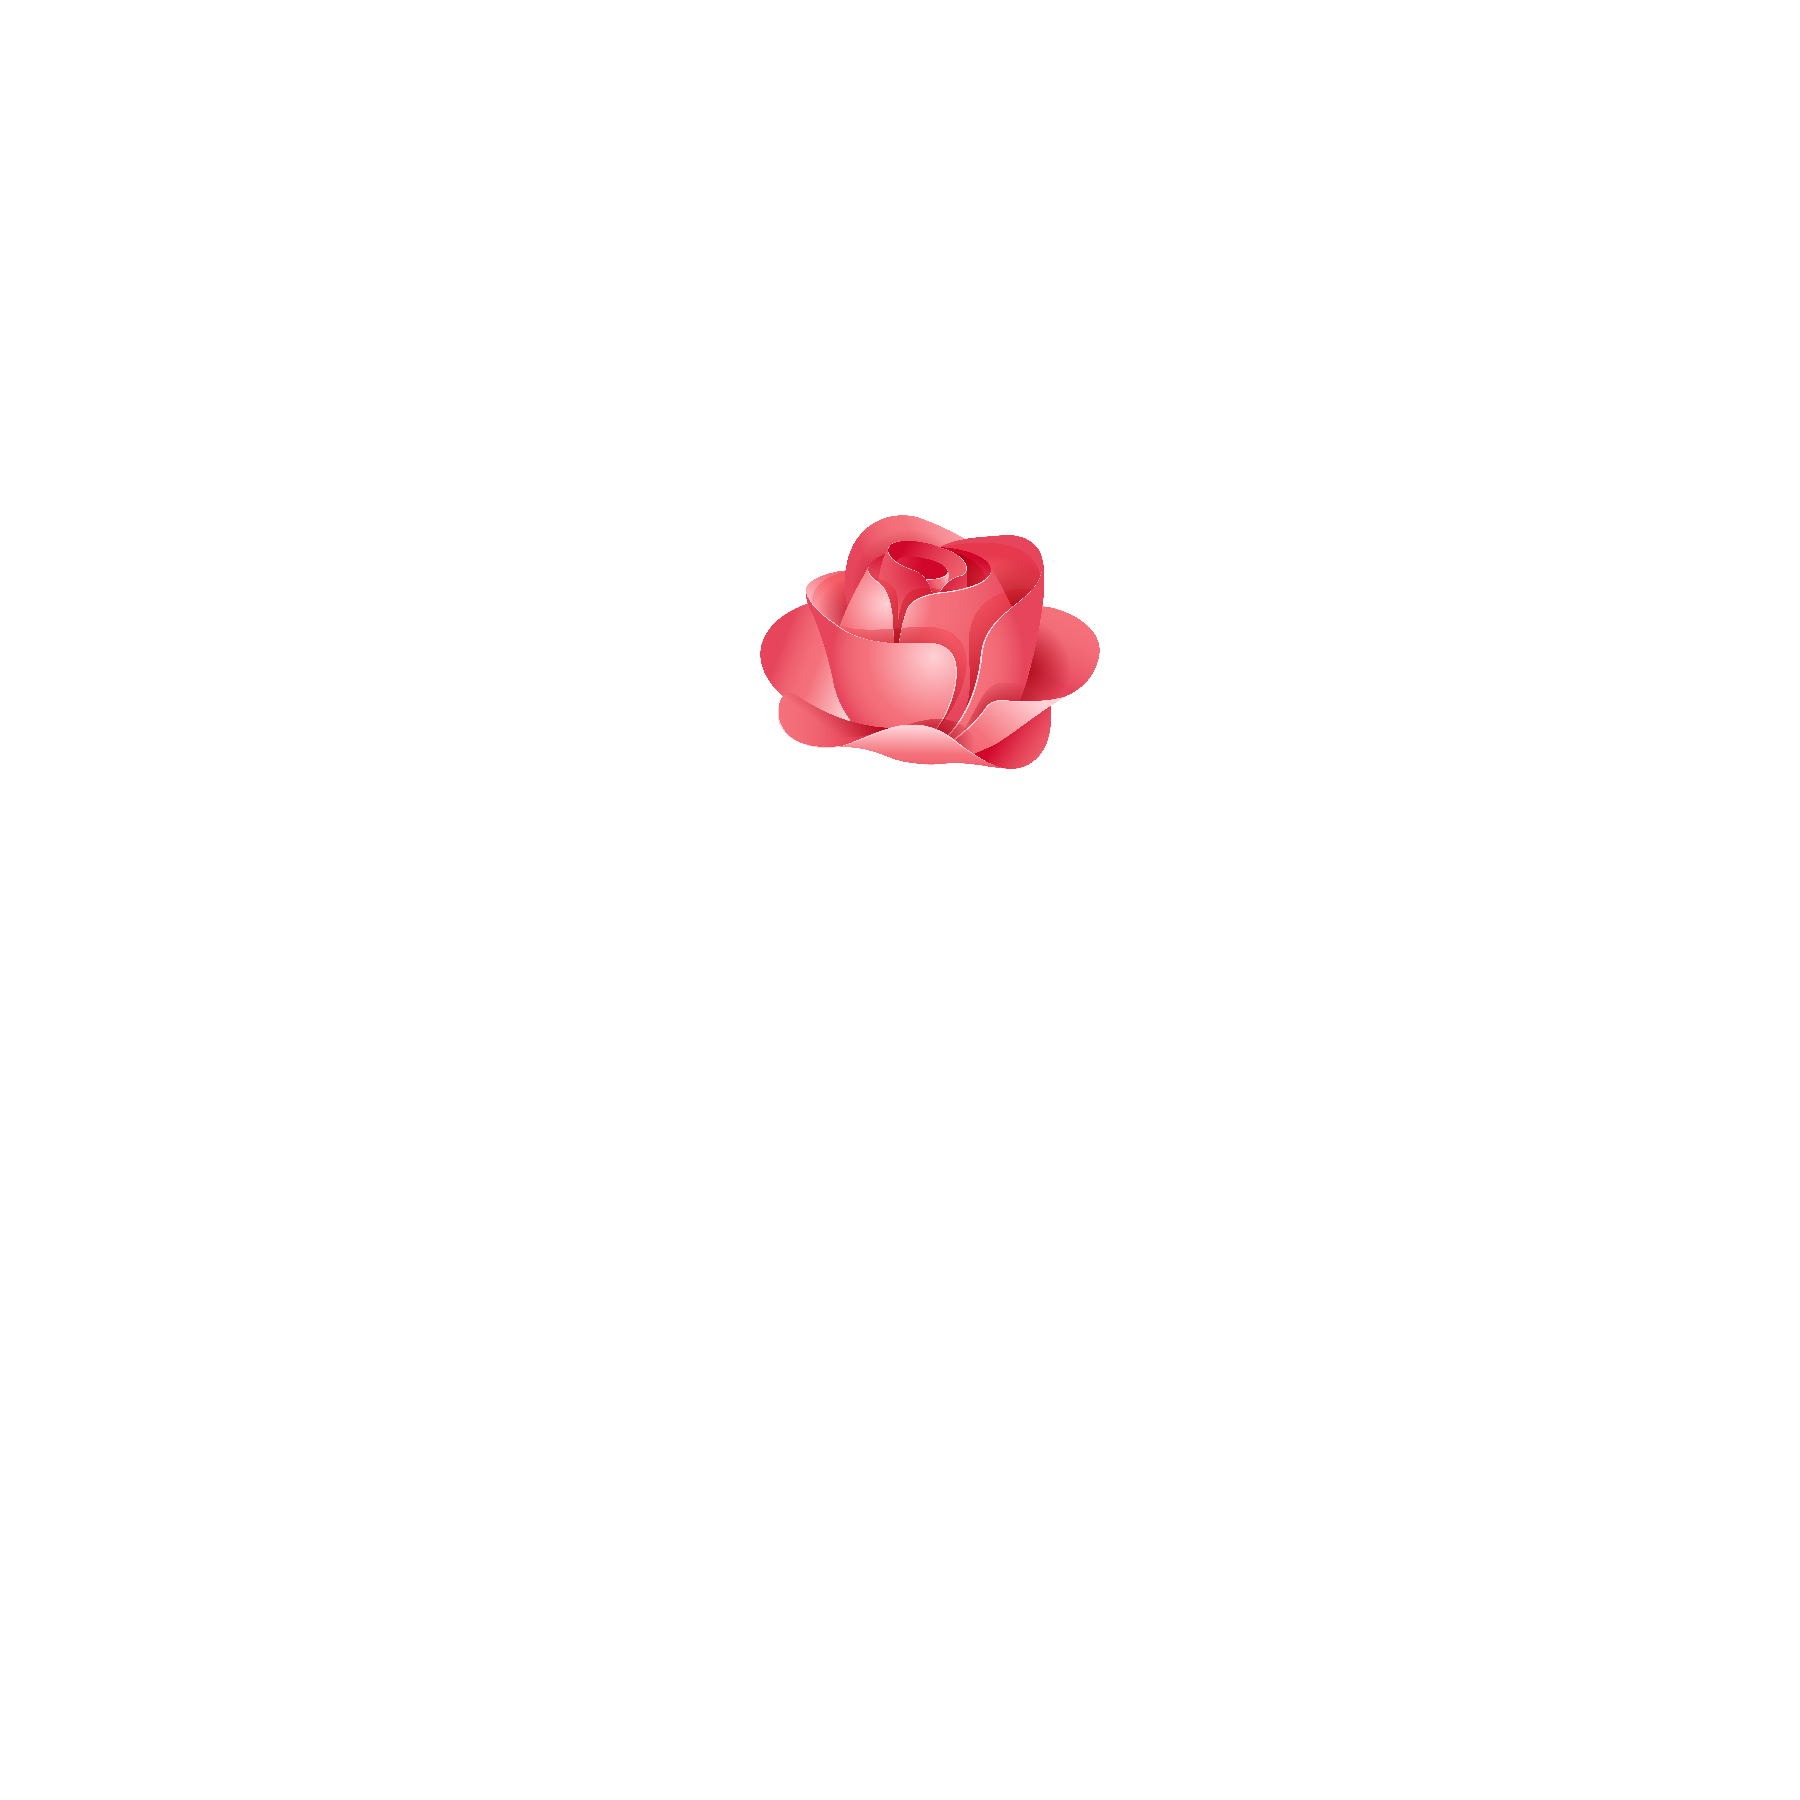 Long Island Flower Delivery